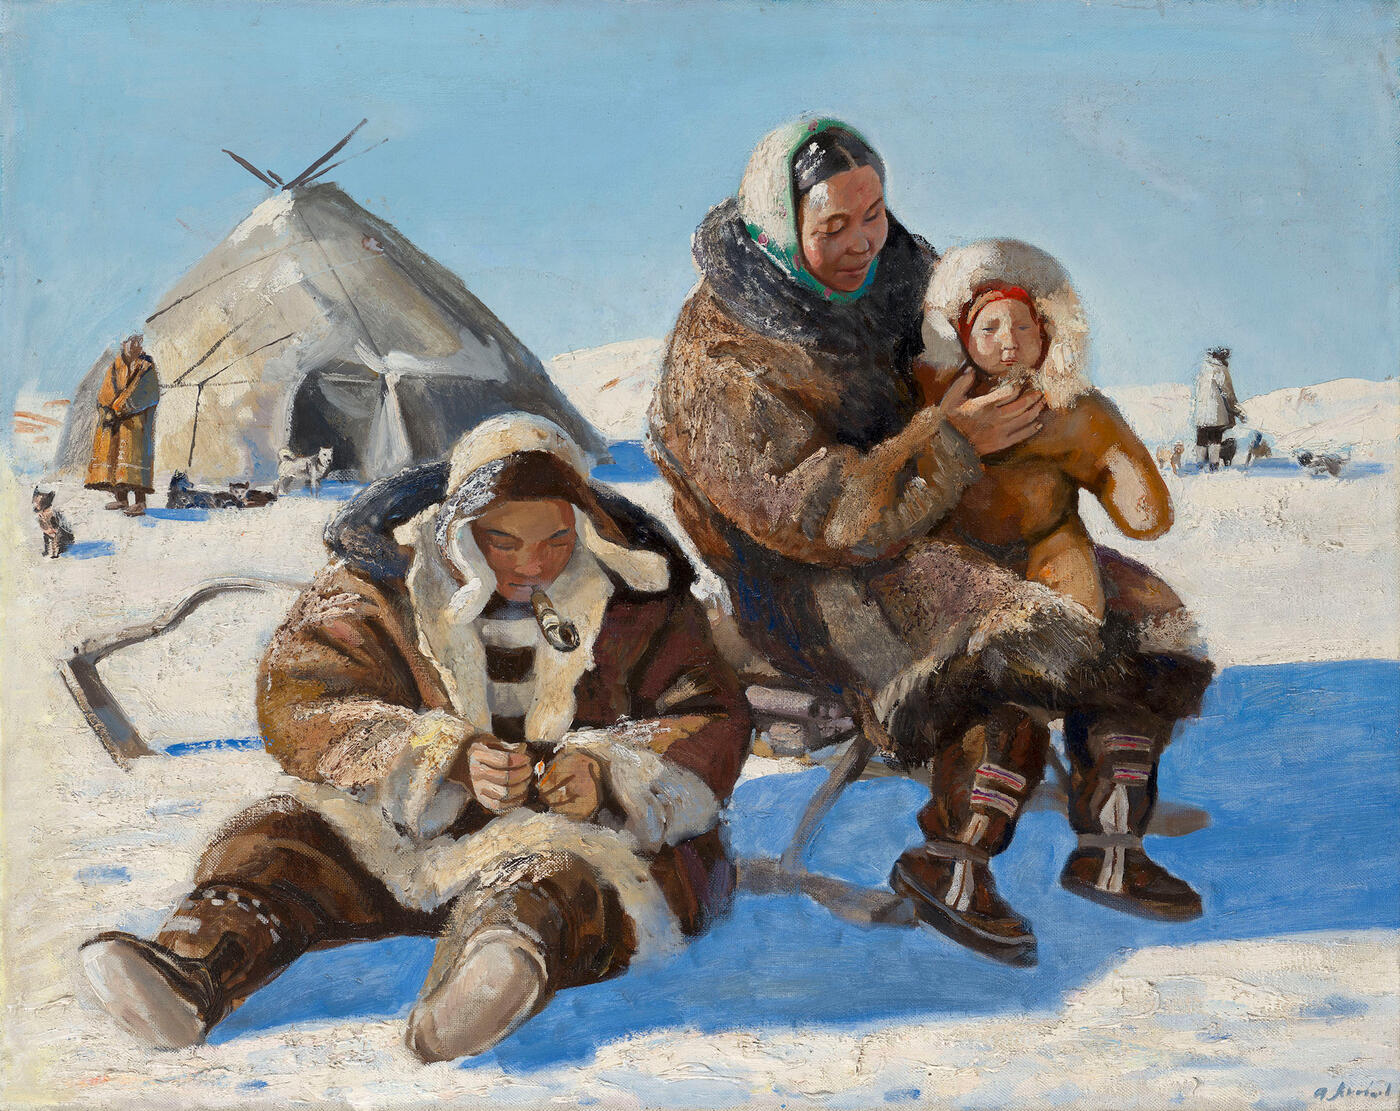 Family, from the series "Chukotka"